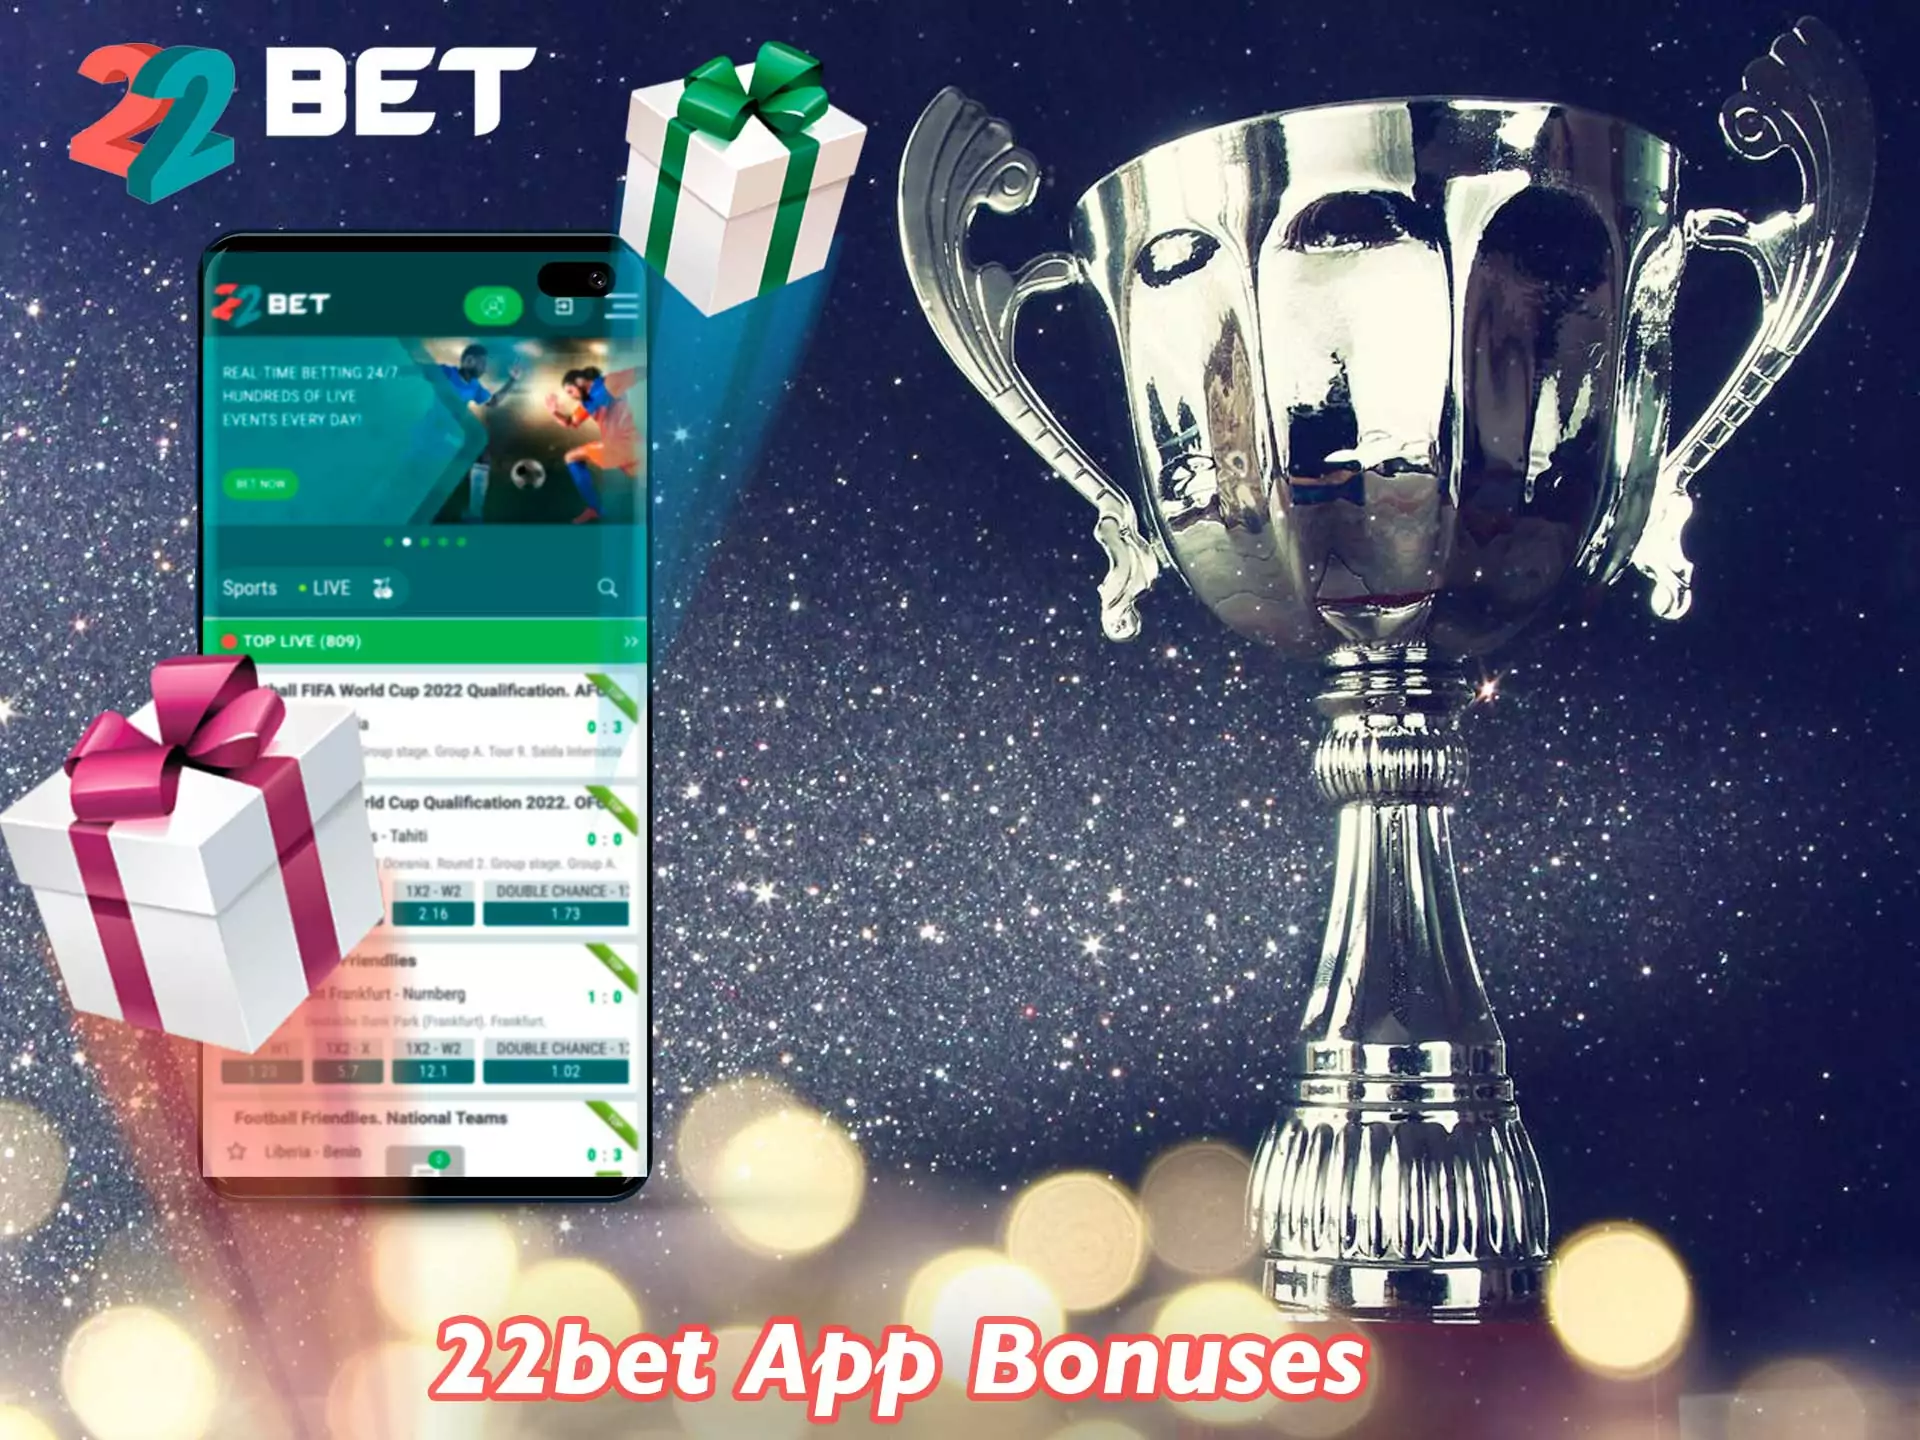 The 22bet app offers a large number of bonuses especially for new users.